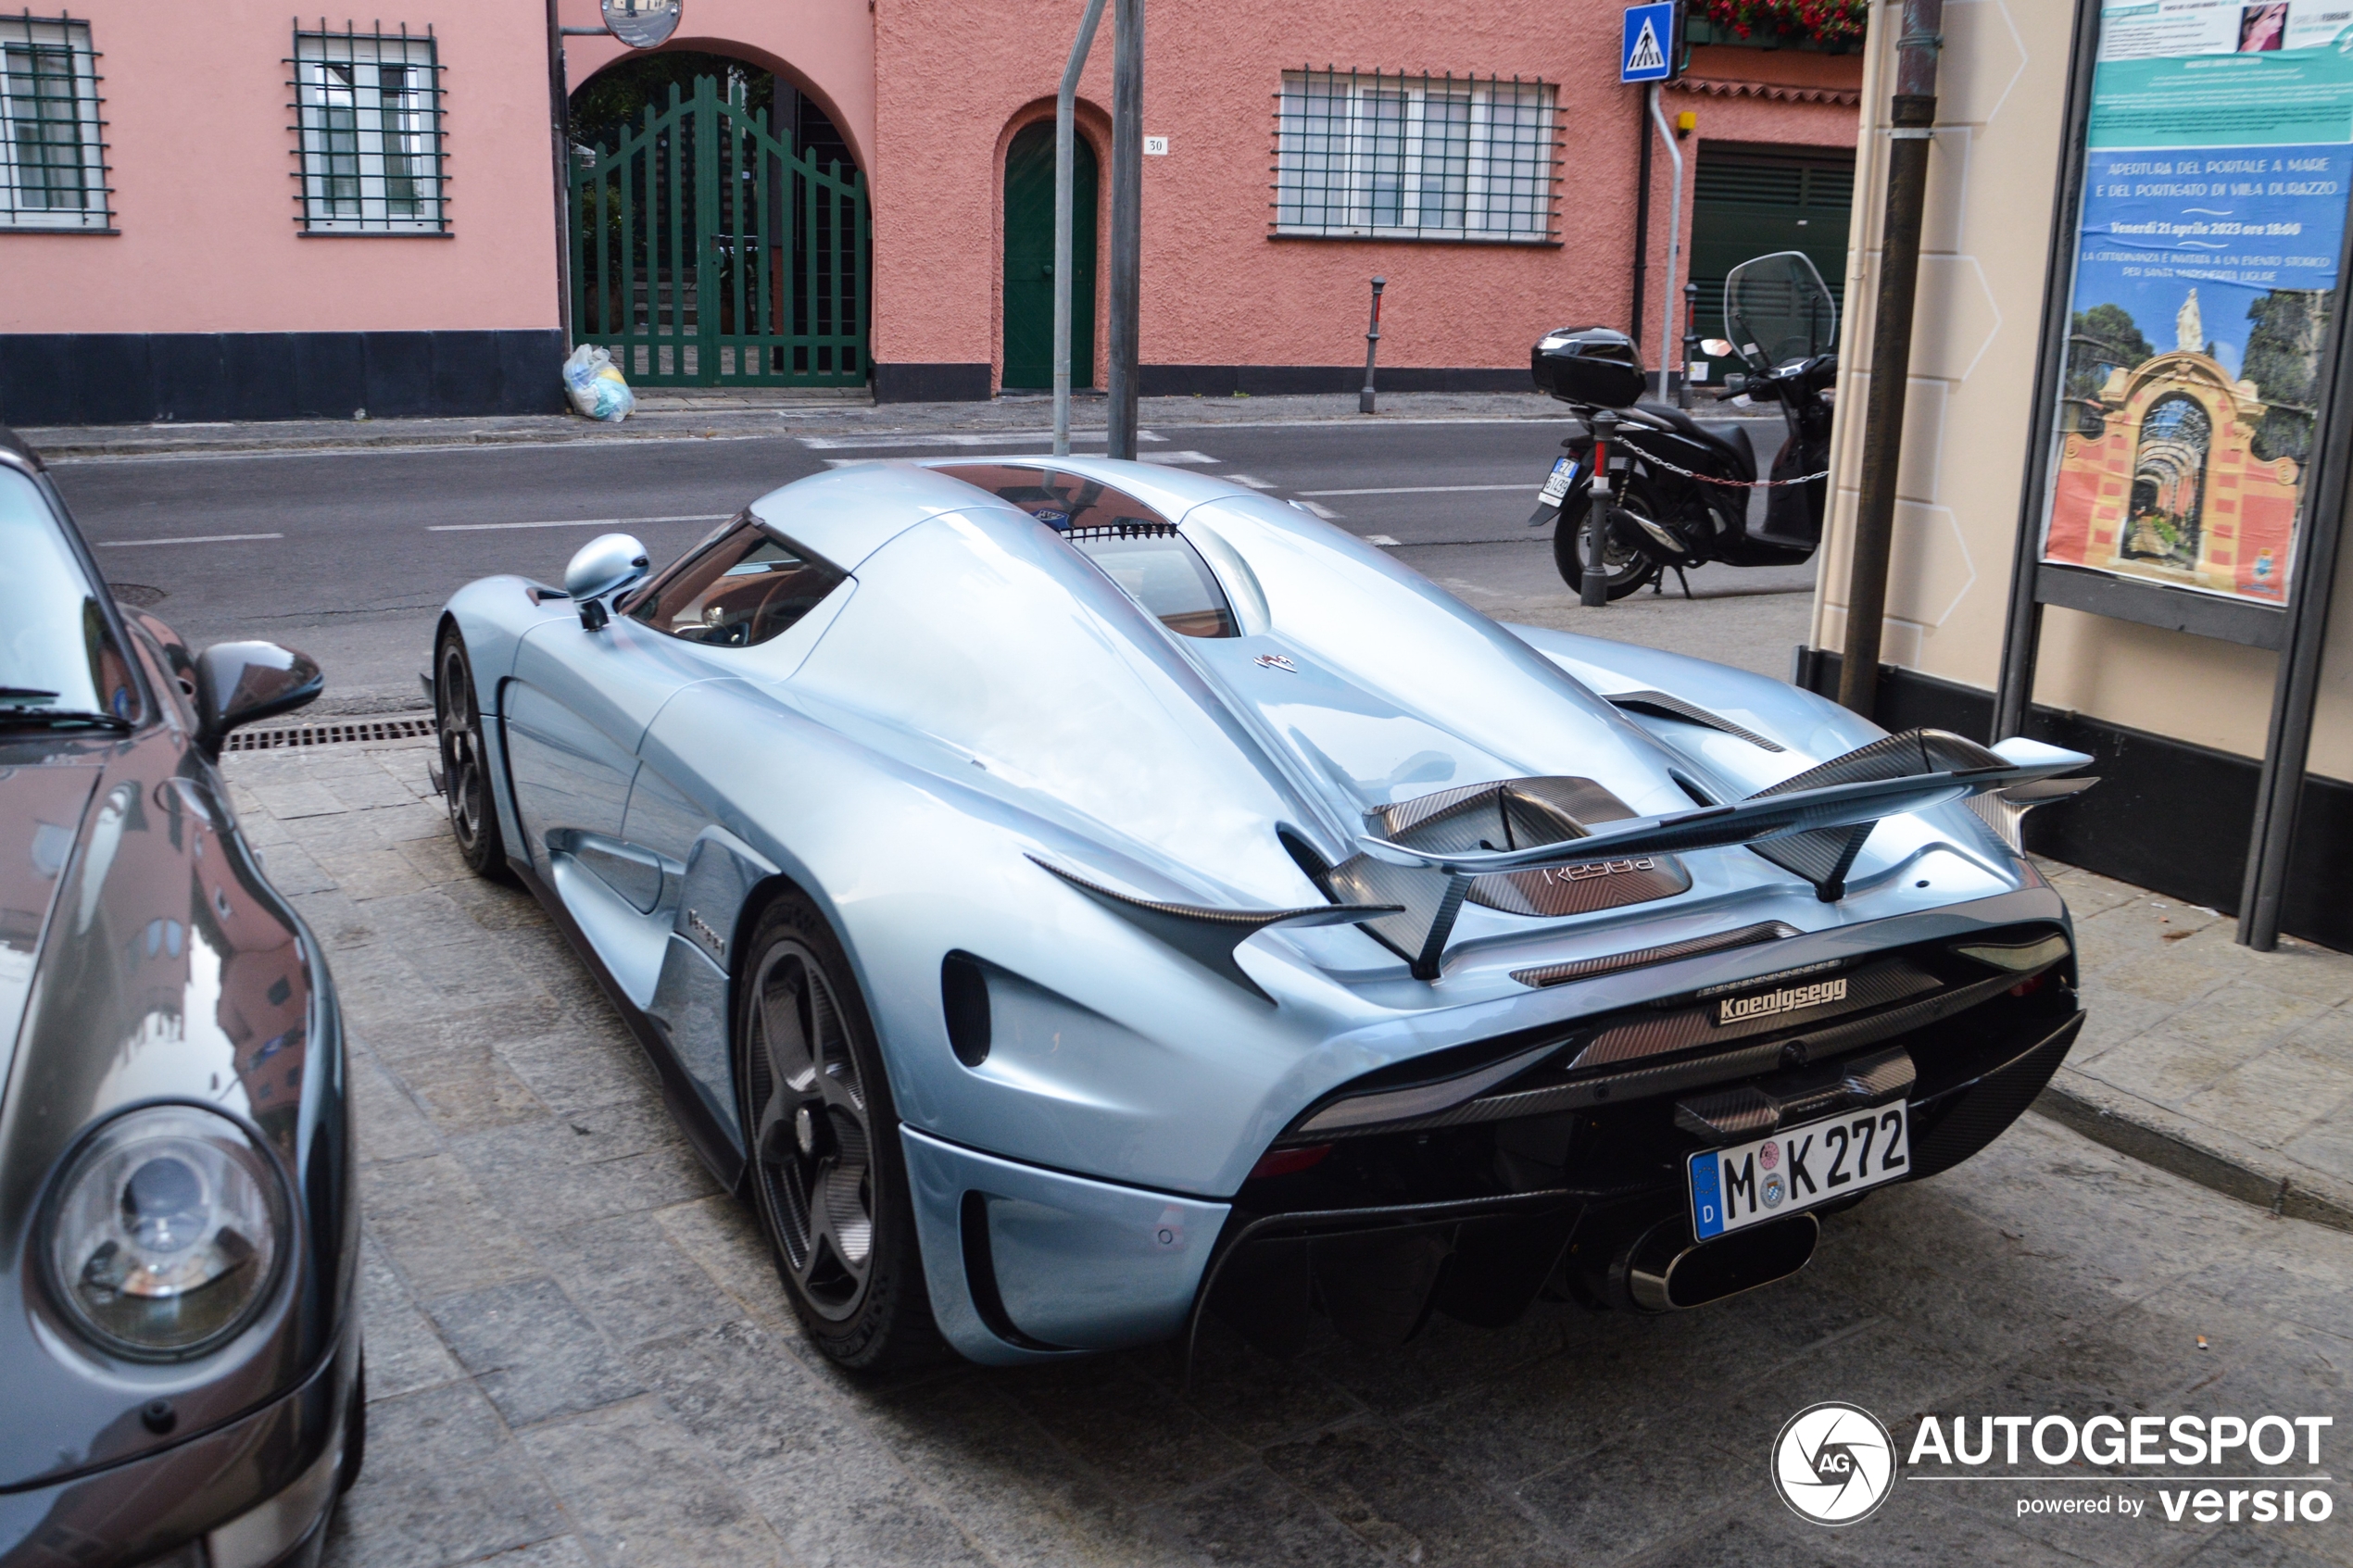 First time this Koenigsegg Regera has been spotted outside of Monaco.